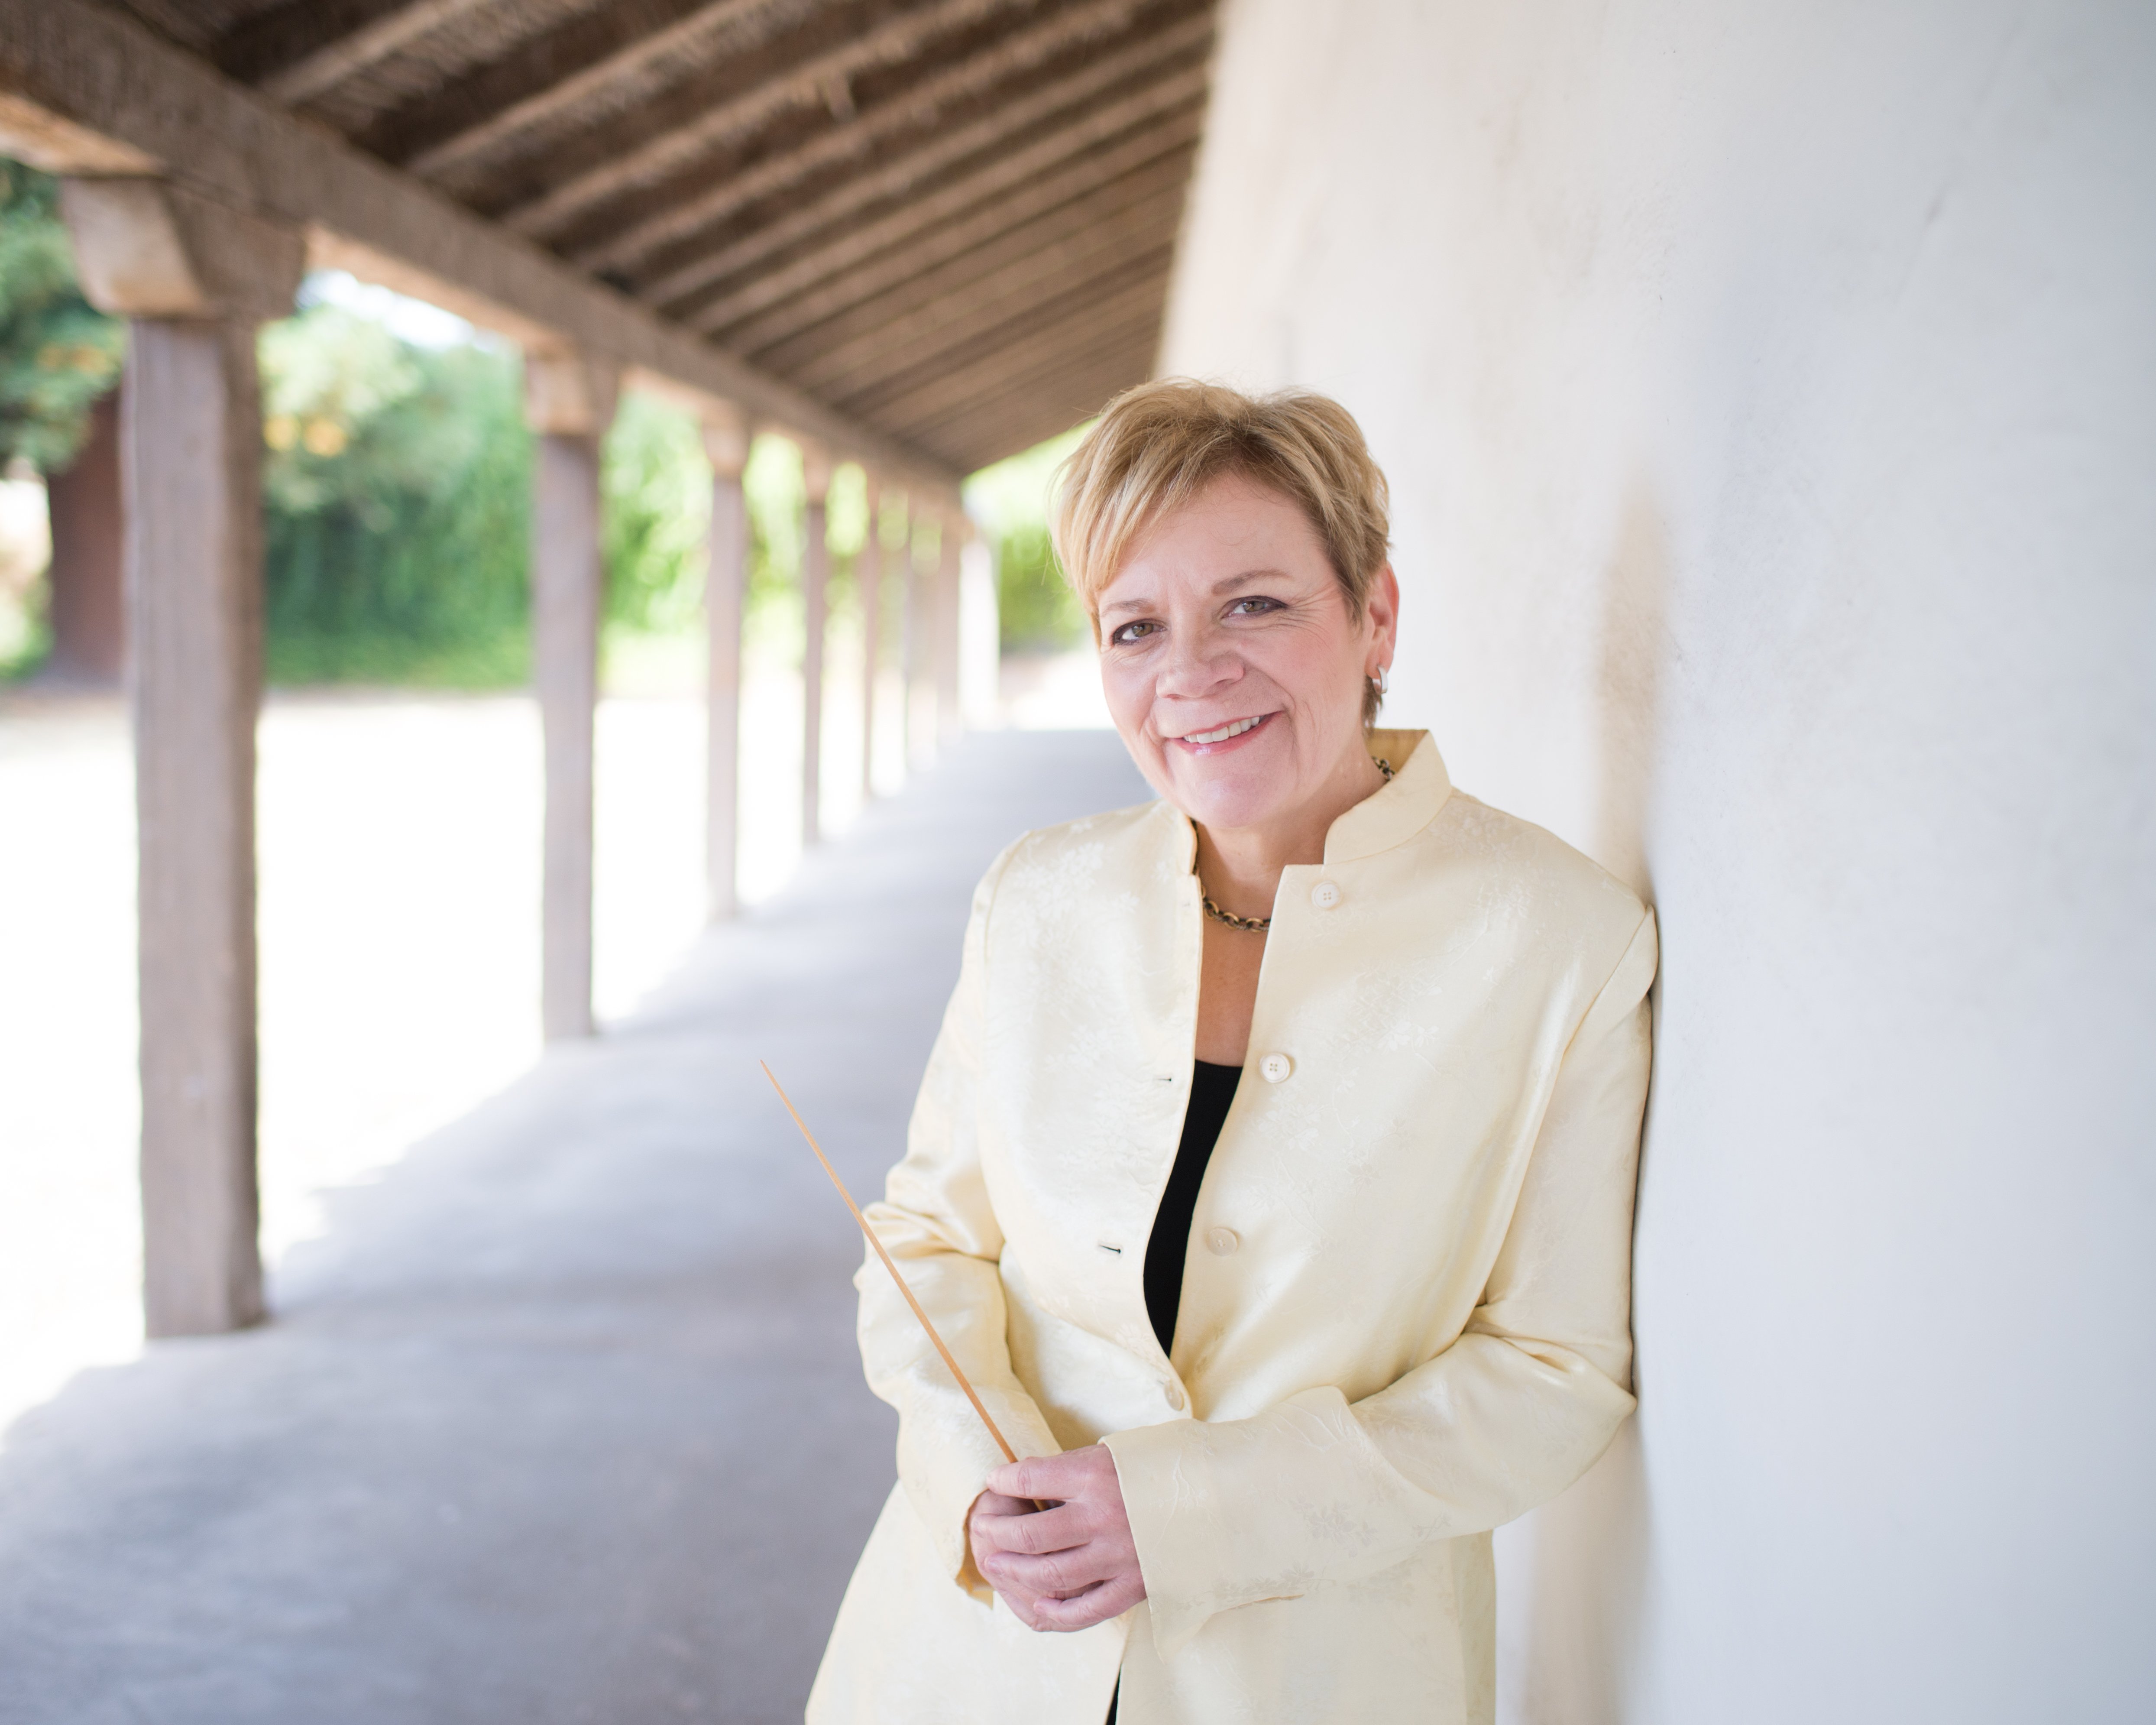 Marin Alsop leaning against a wall